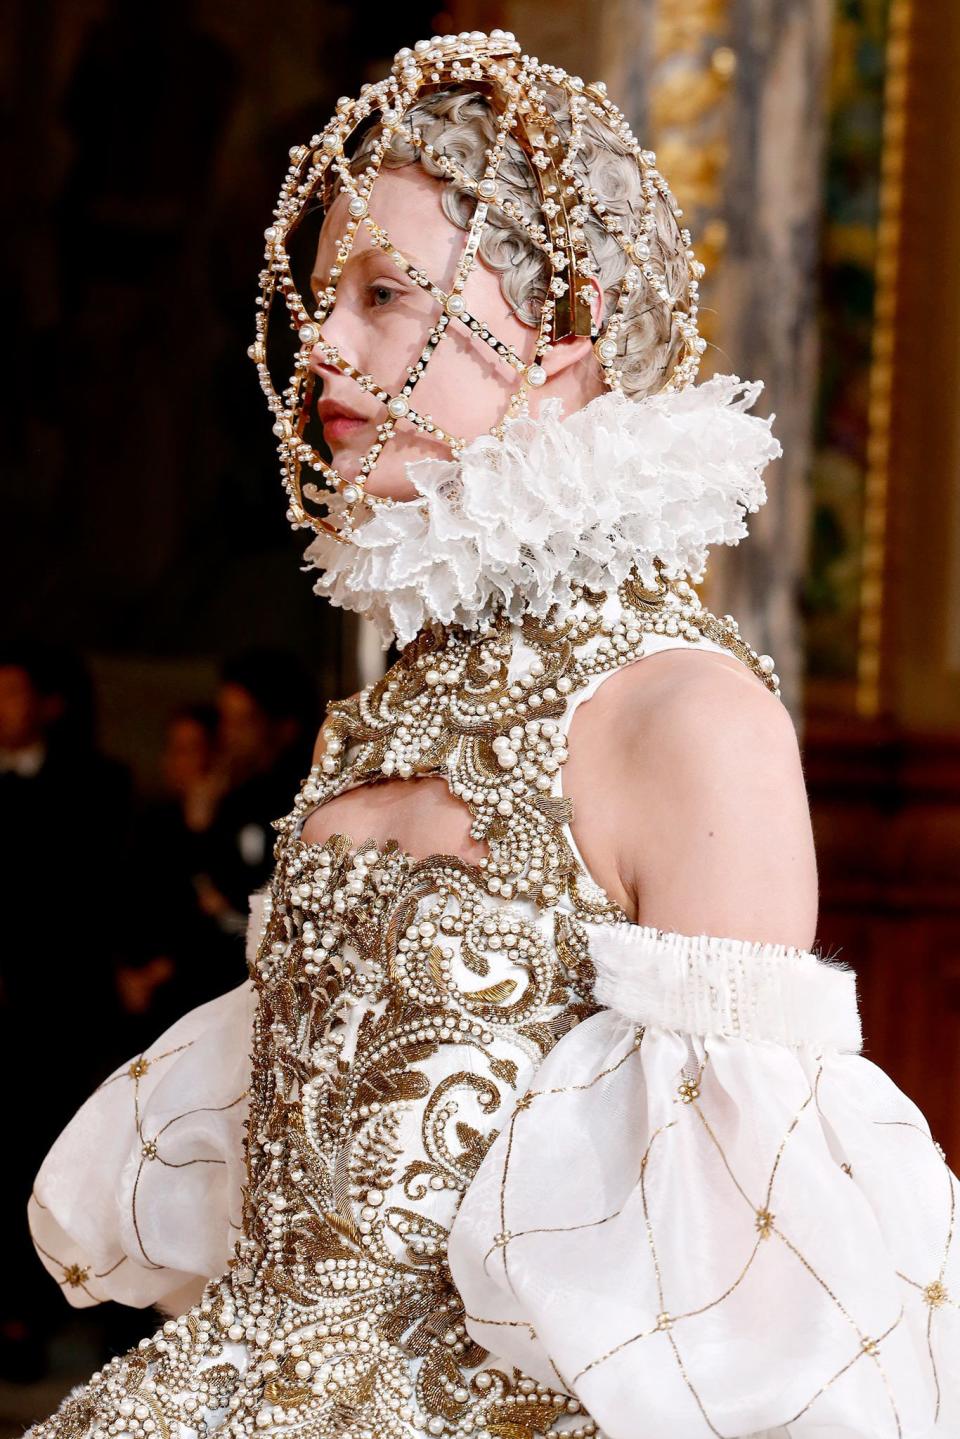 From ethereal white lashes to graphic sci-fi visors, a look back at the romantic beauty ideas on Sarah Burton's Alexander McQueen runway.